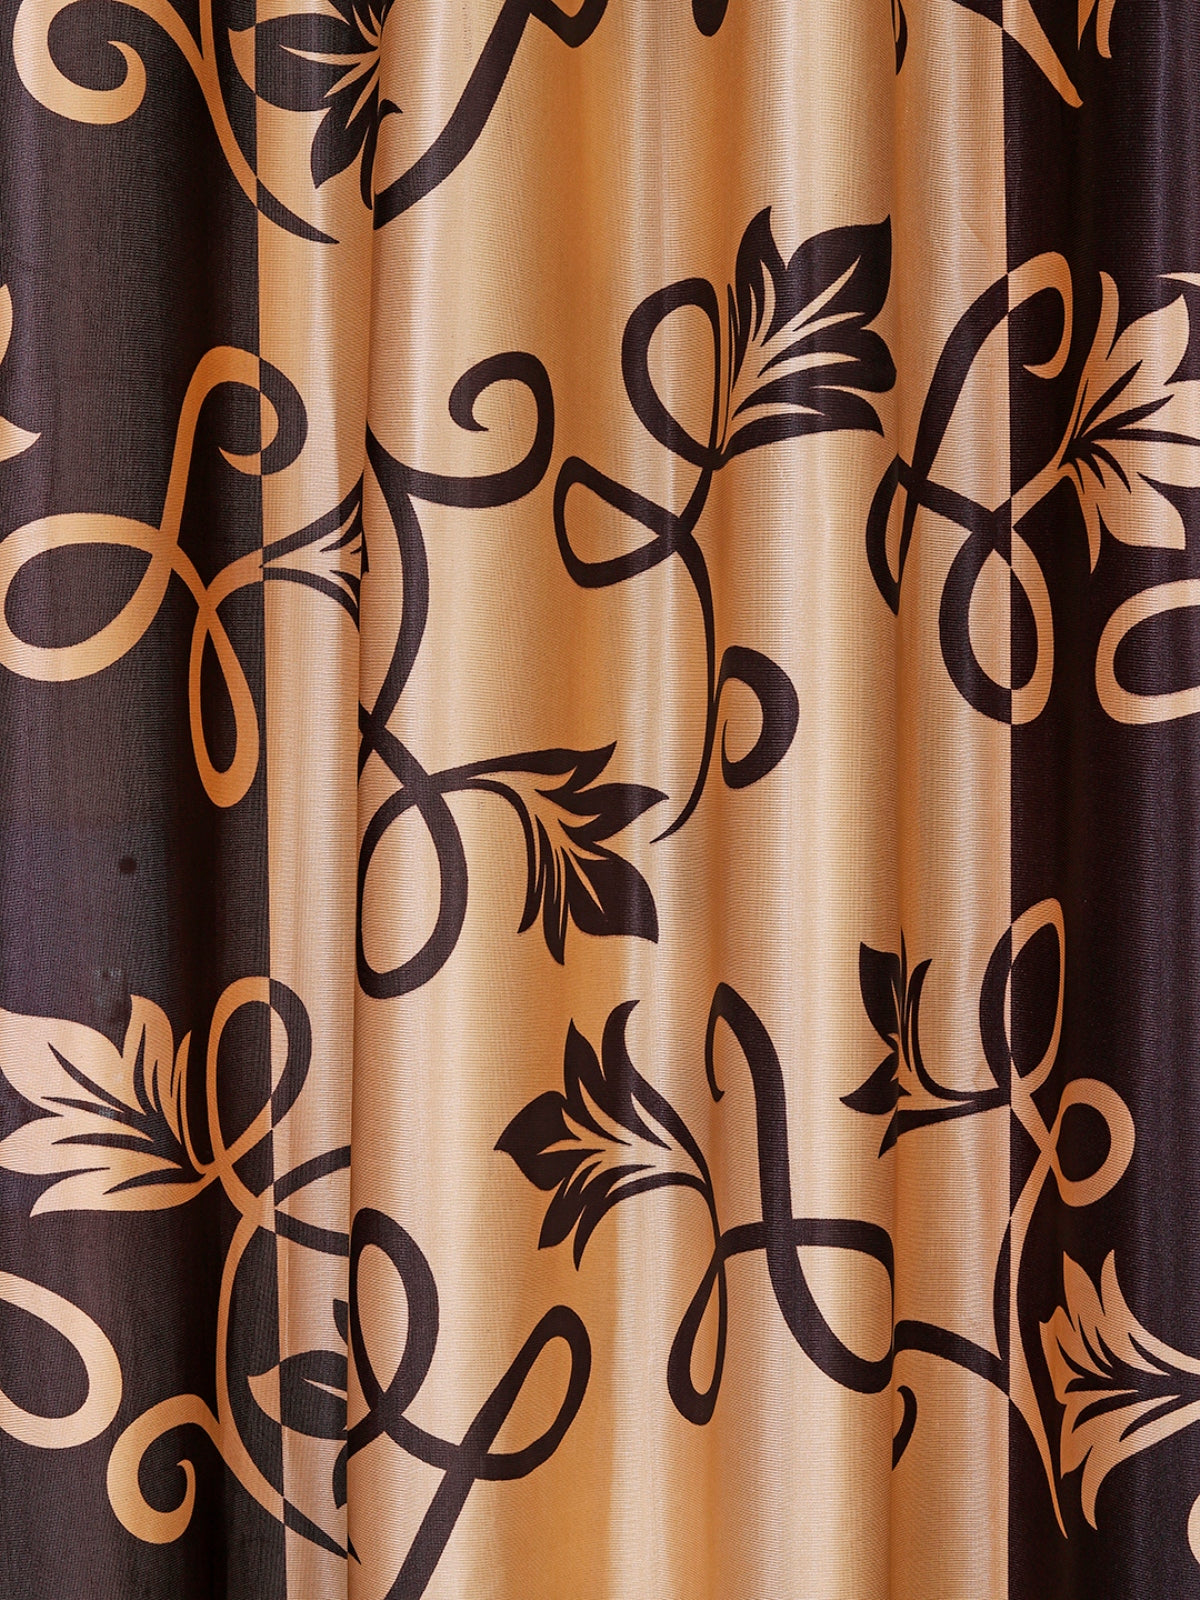 Romee Gold & Brown Floral Patterned Set of 2 Long Door Curtains